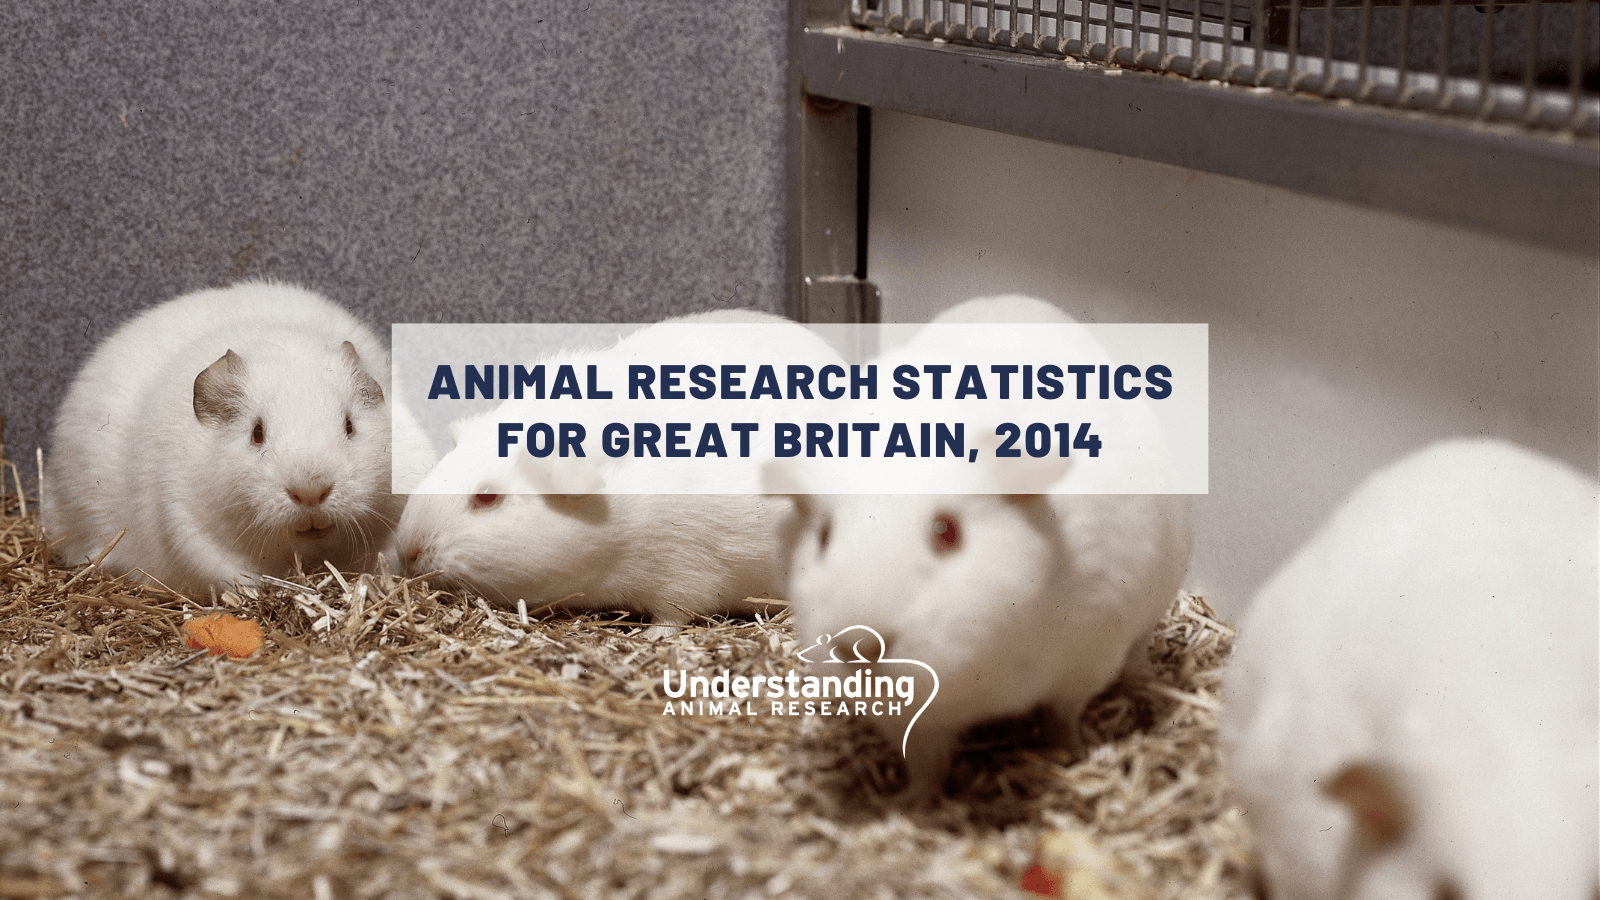 Animal research statistics for Great Britain, 2014